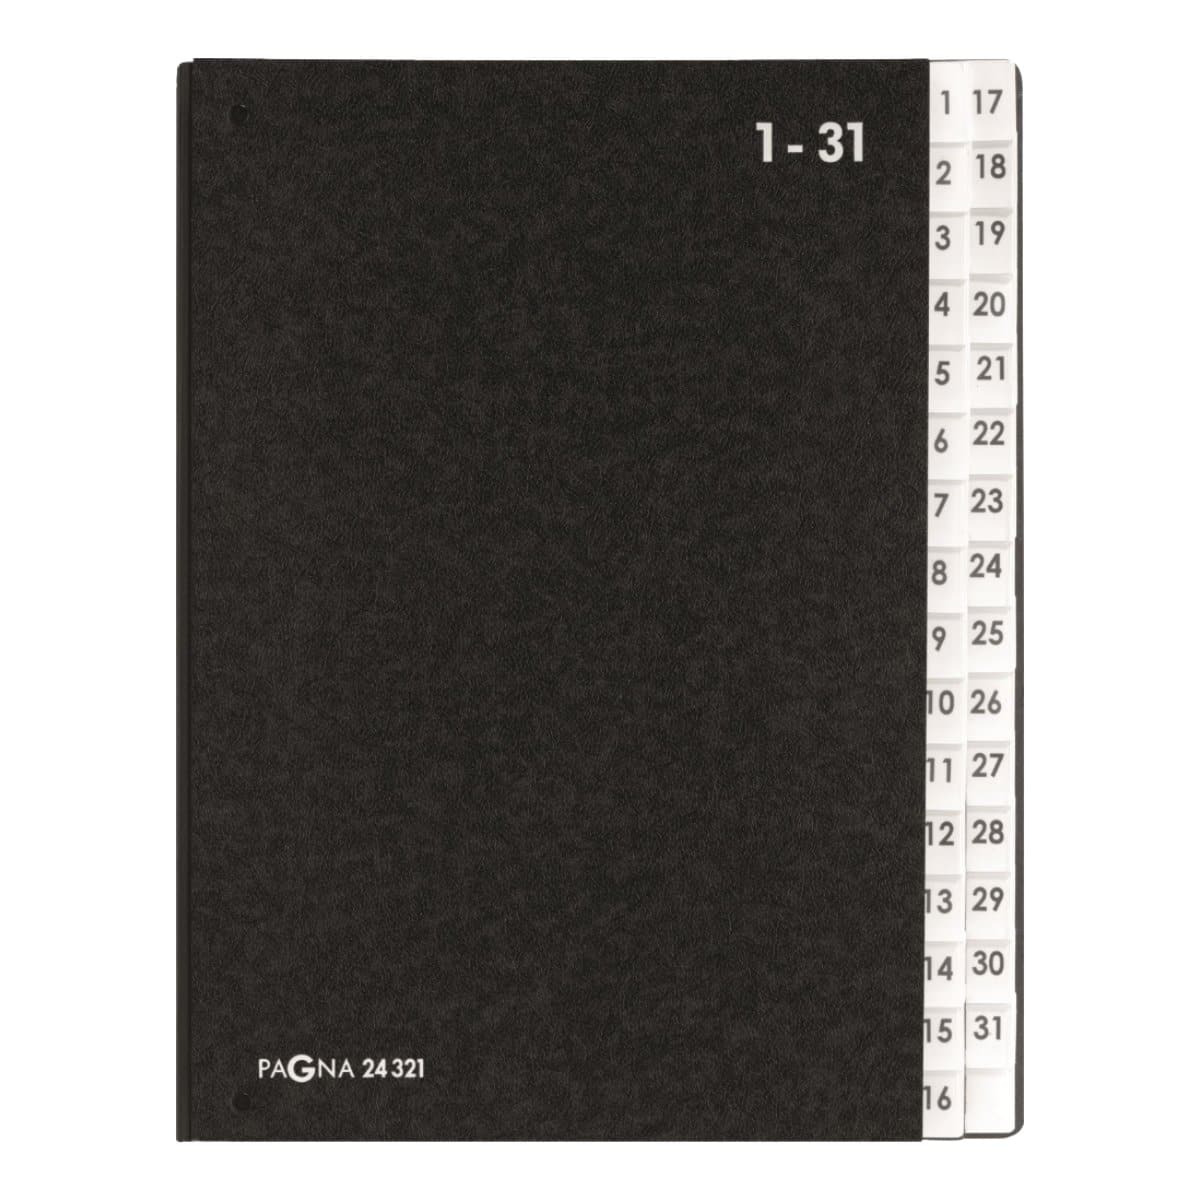 Pagna Filing Book with tabs 1-31, Black